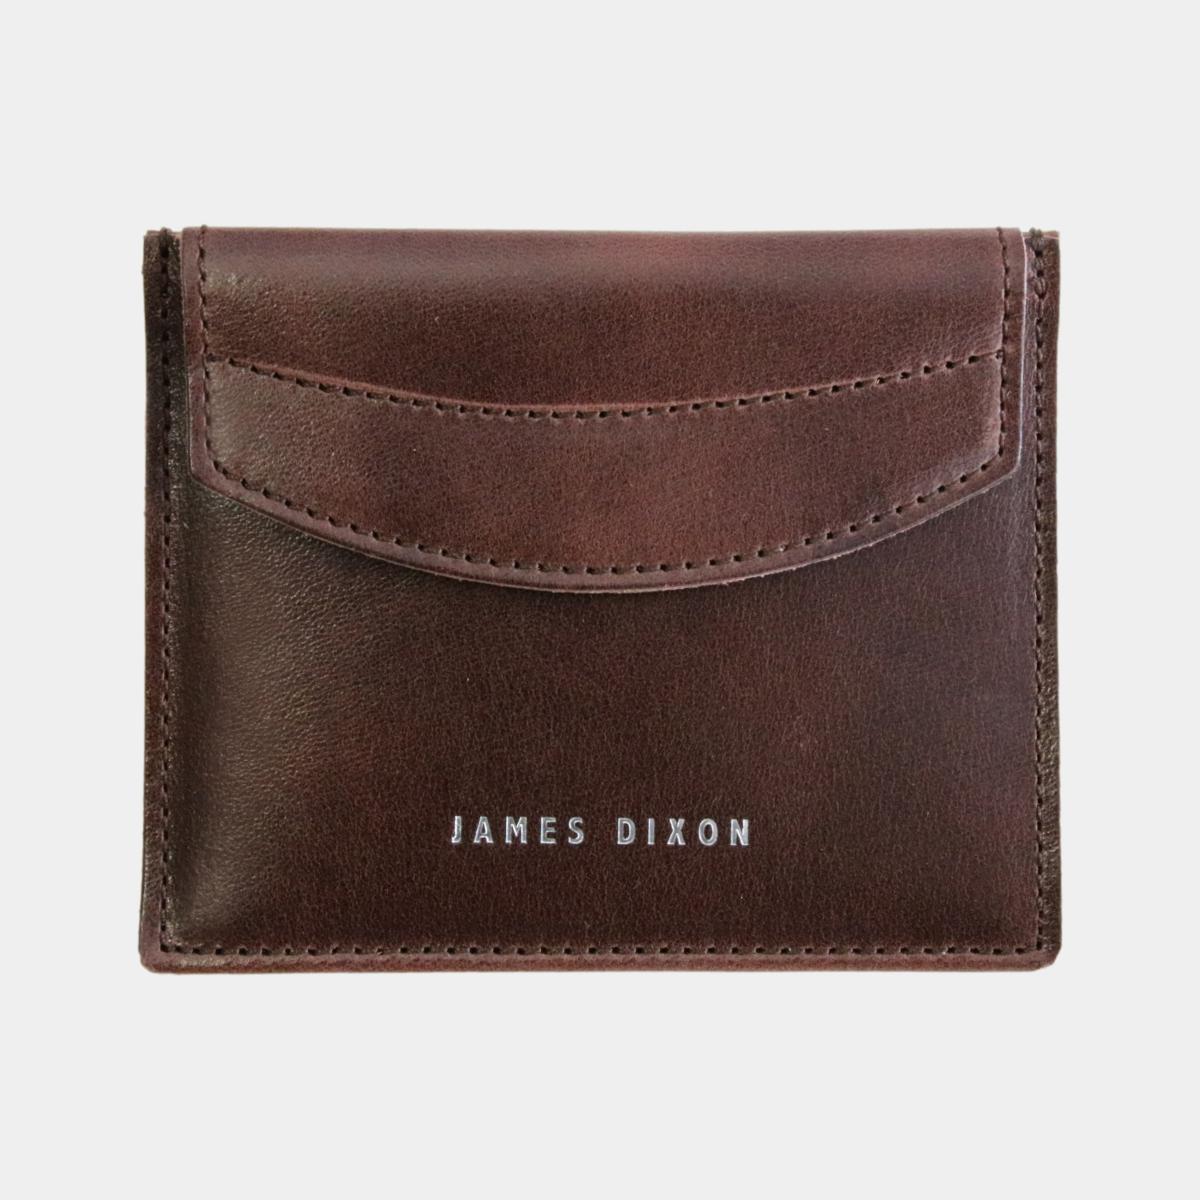 jd0330 james dixon poco classic cacao brown coin pocket wallet front